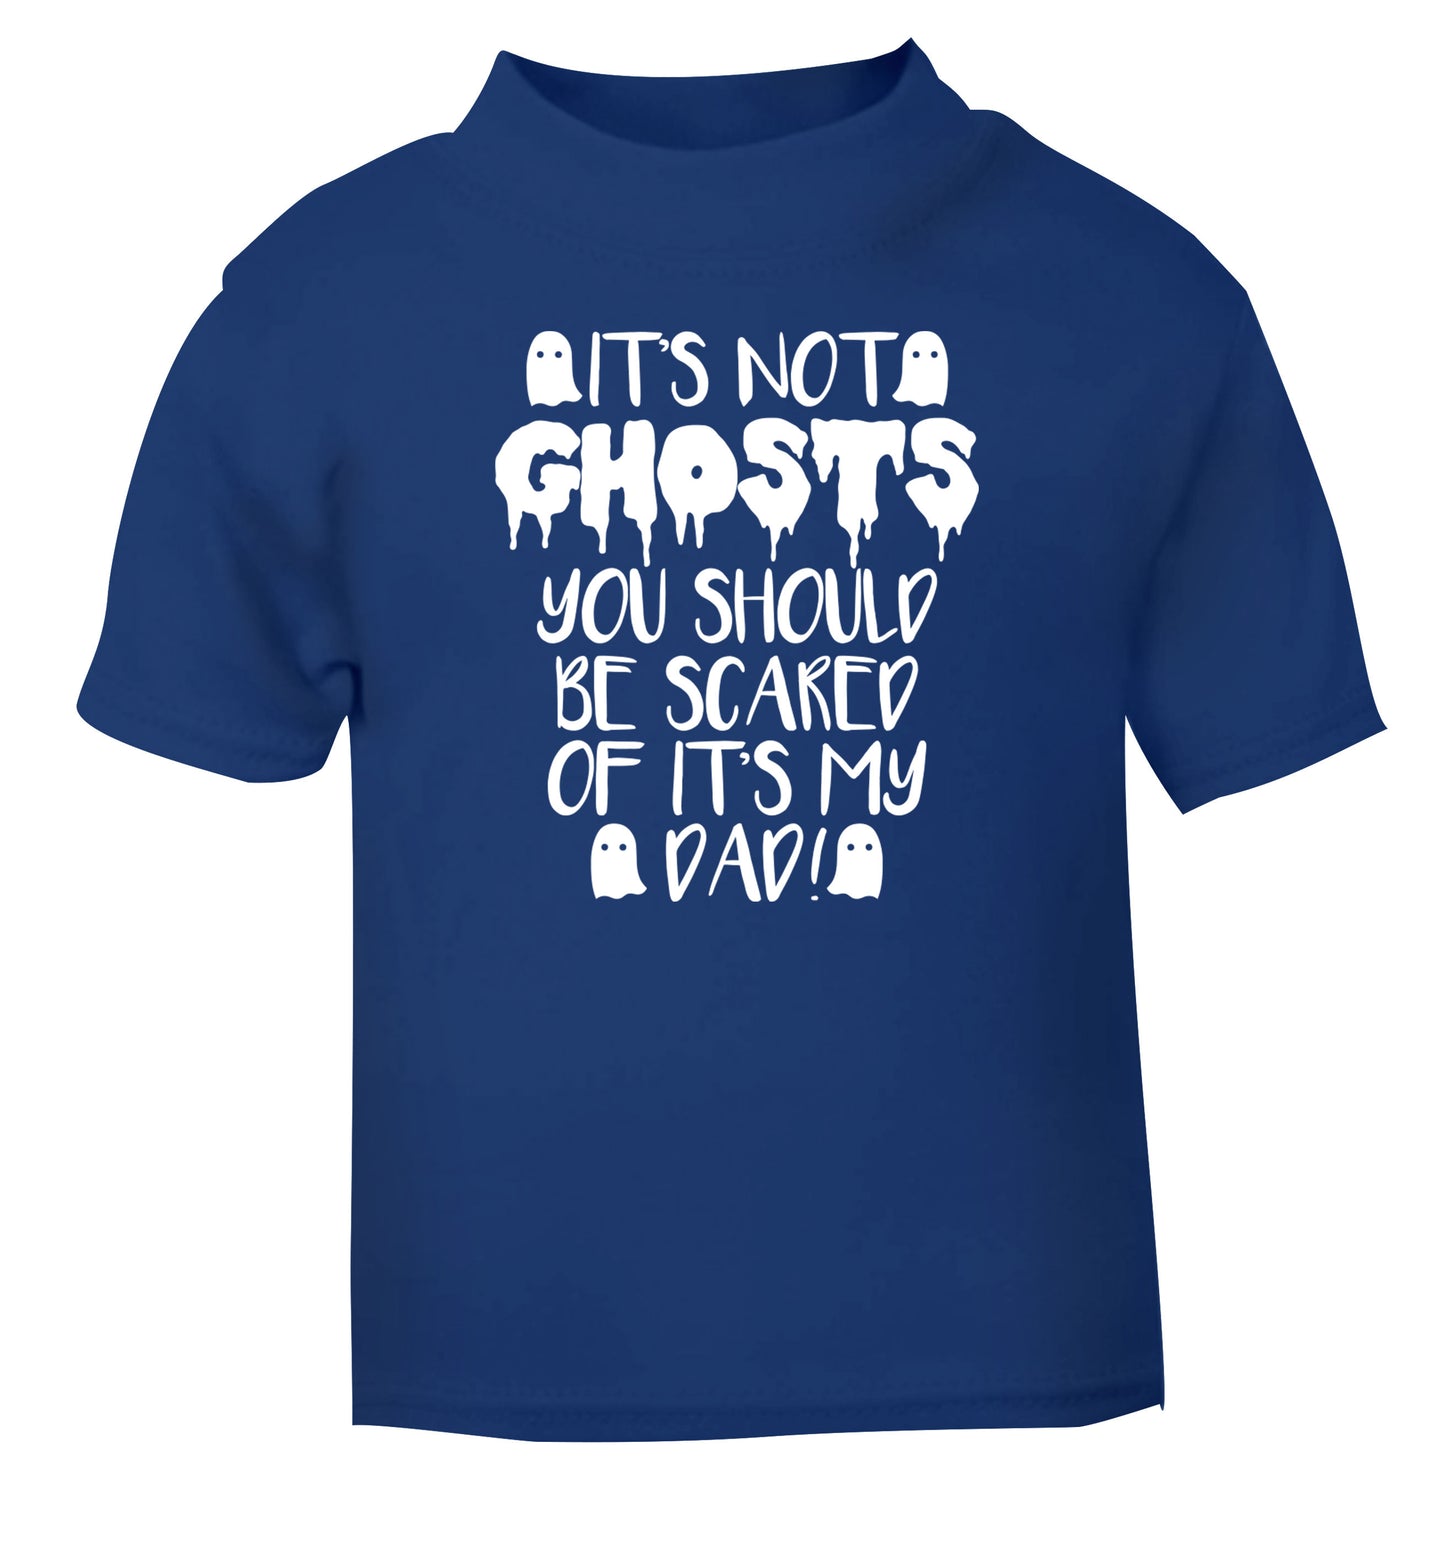 It's not ghosts you should be scared of it's my dad! blue Baby Toddler Tshirt 2 Years